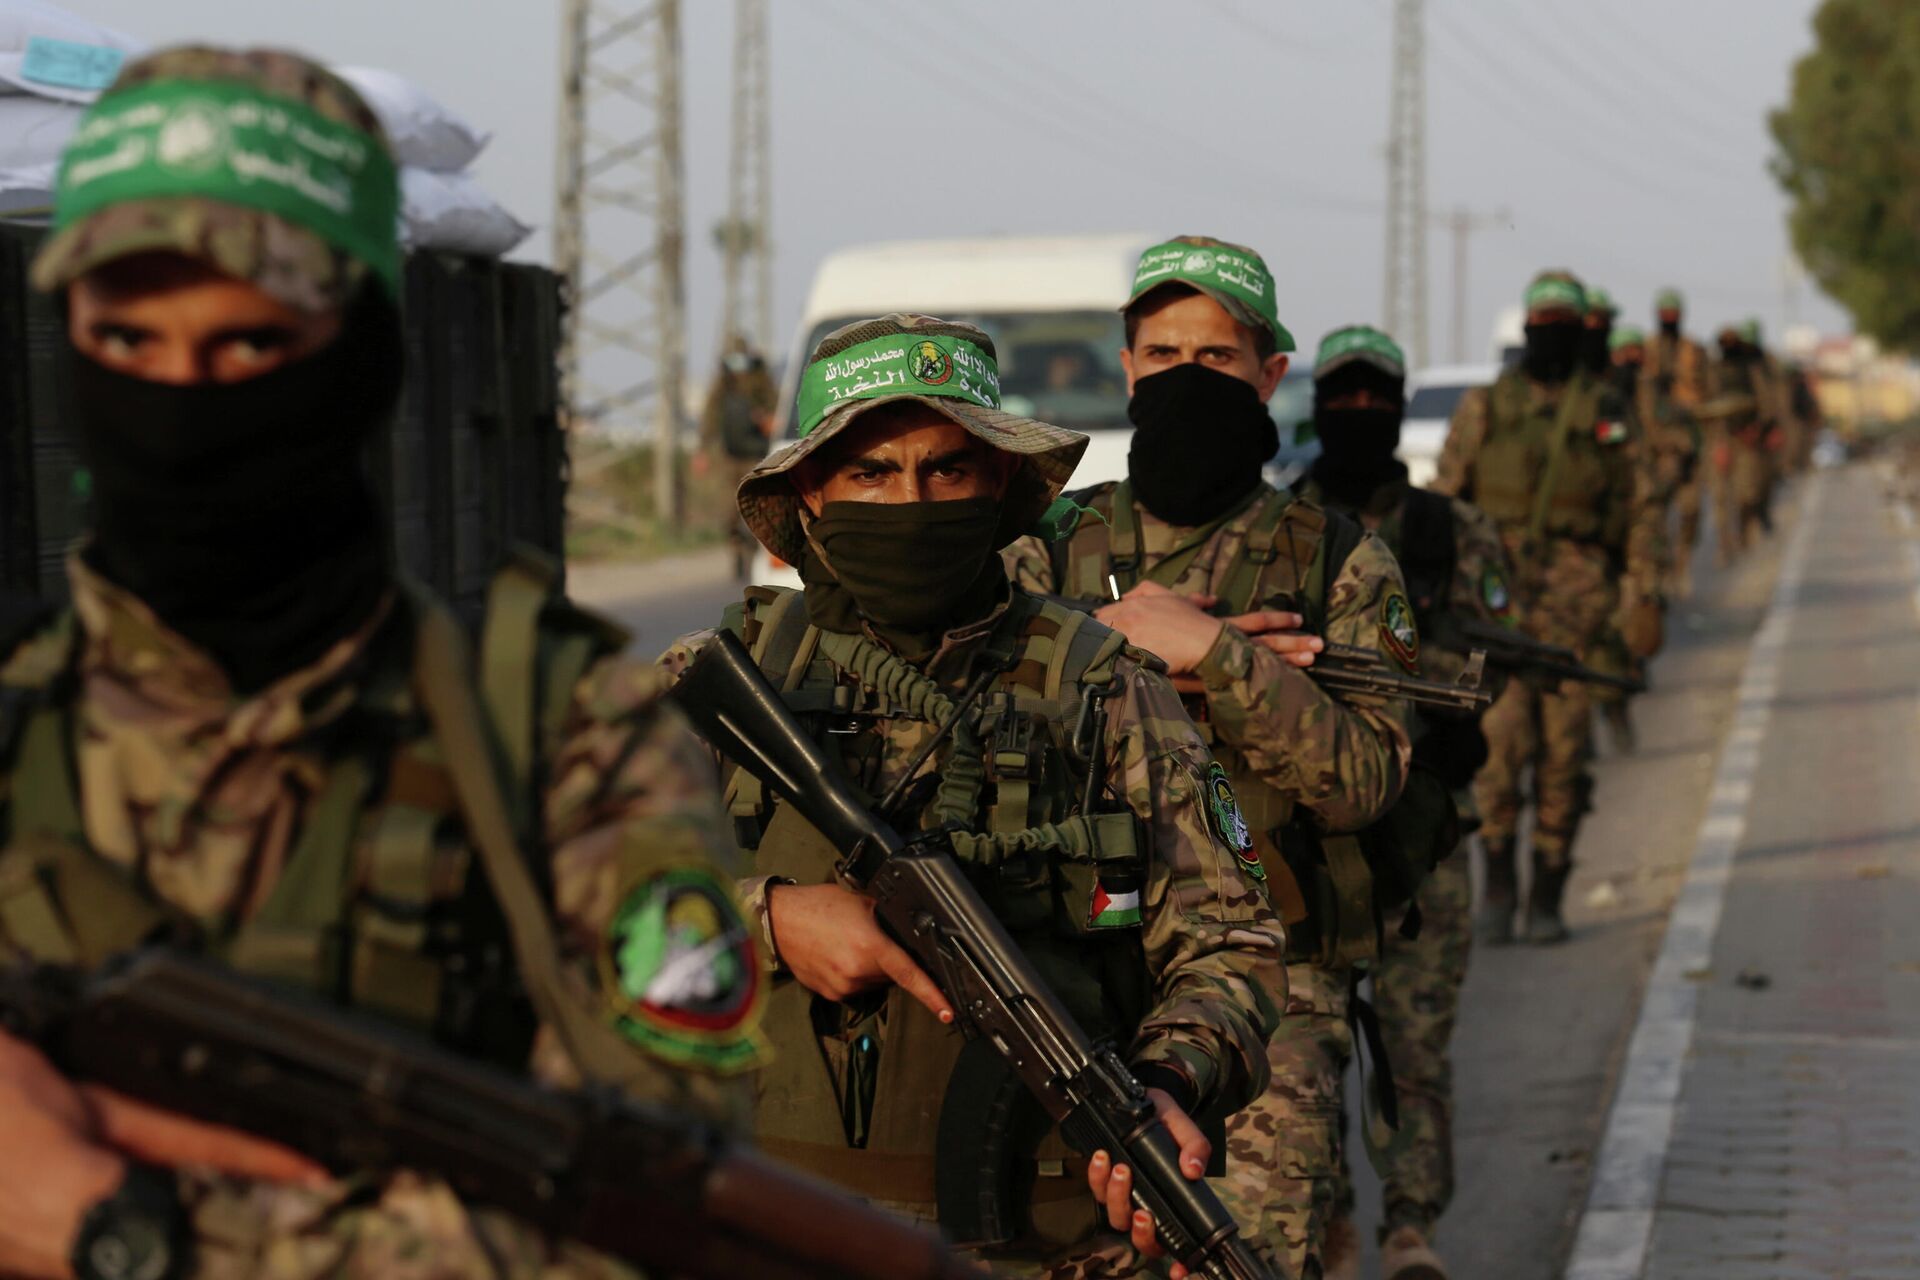 Masked militants from the Izzedine al-Qassam Brigades, a military wing of Hamas, march with their rifles along the main road of the Nusseirat refugee camp, central Gaza Strip, Thursday, 28 October 2021. - Sputnik International, 1920, 21.04.2022